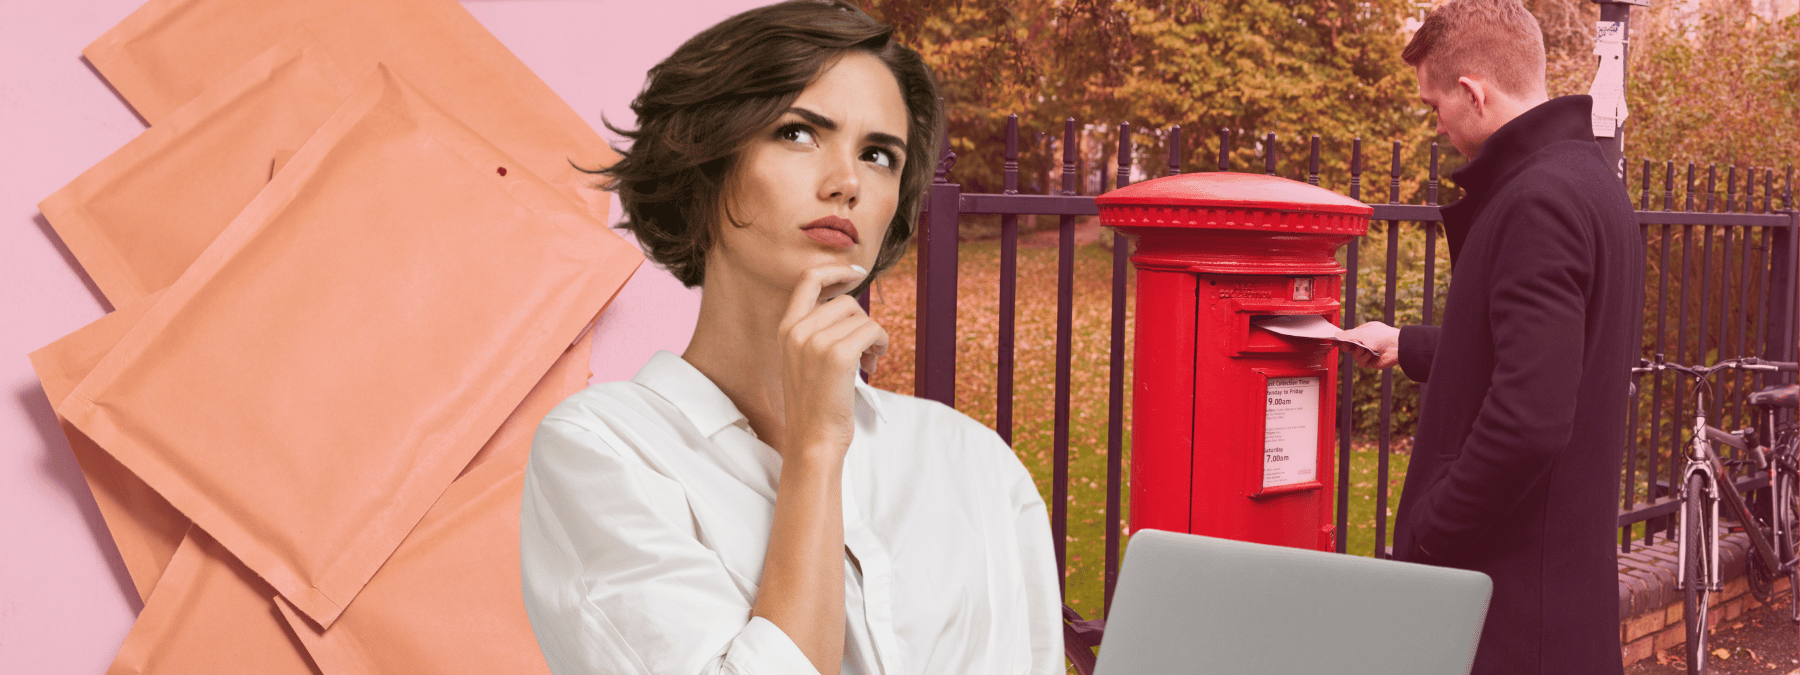 Woman on laptop deep in thought